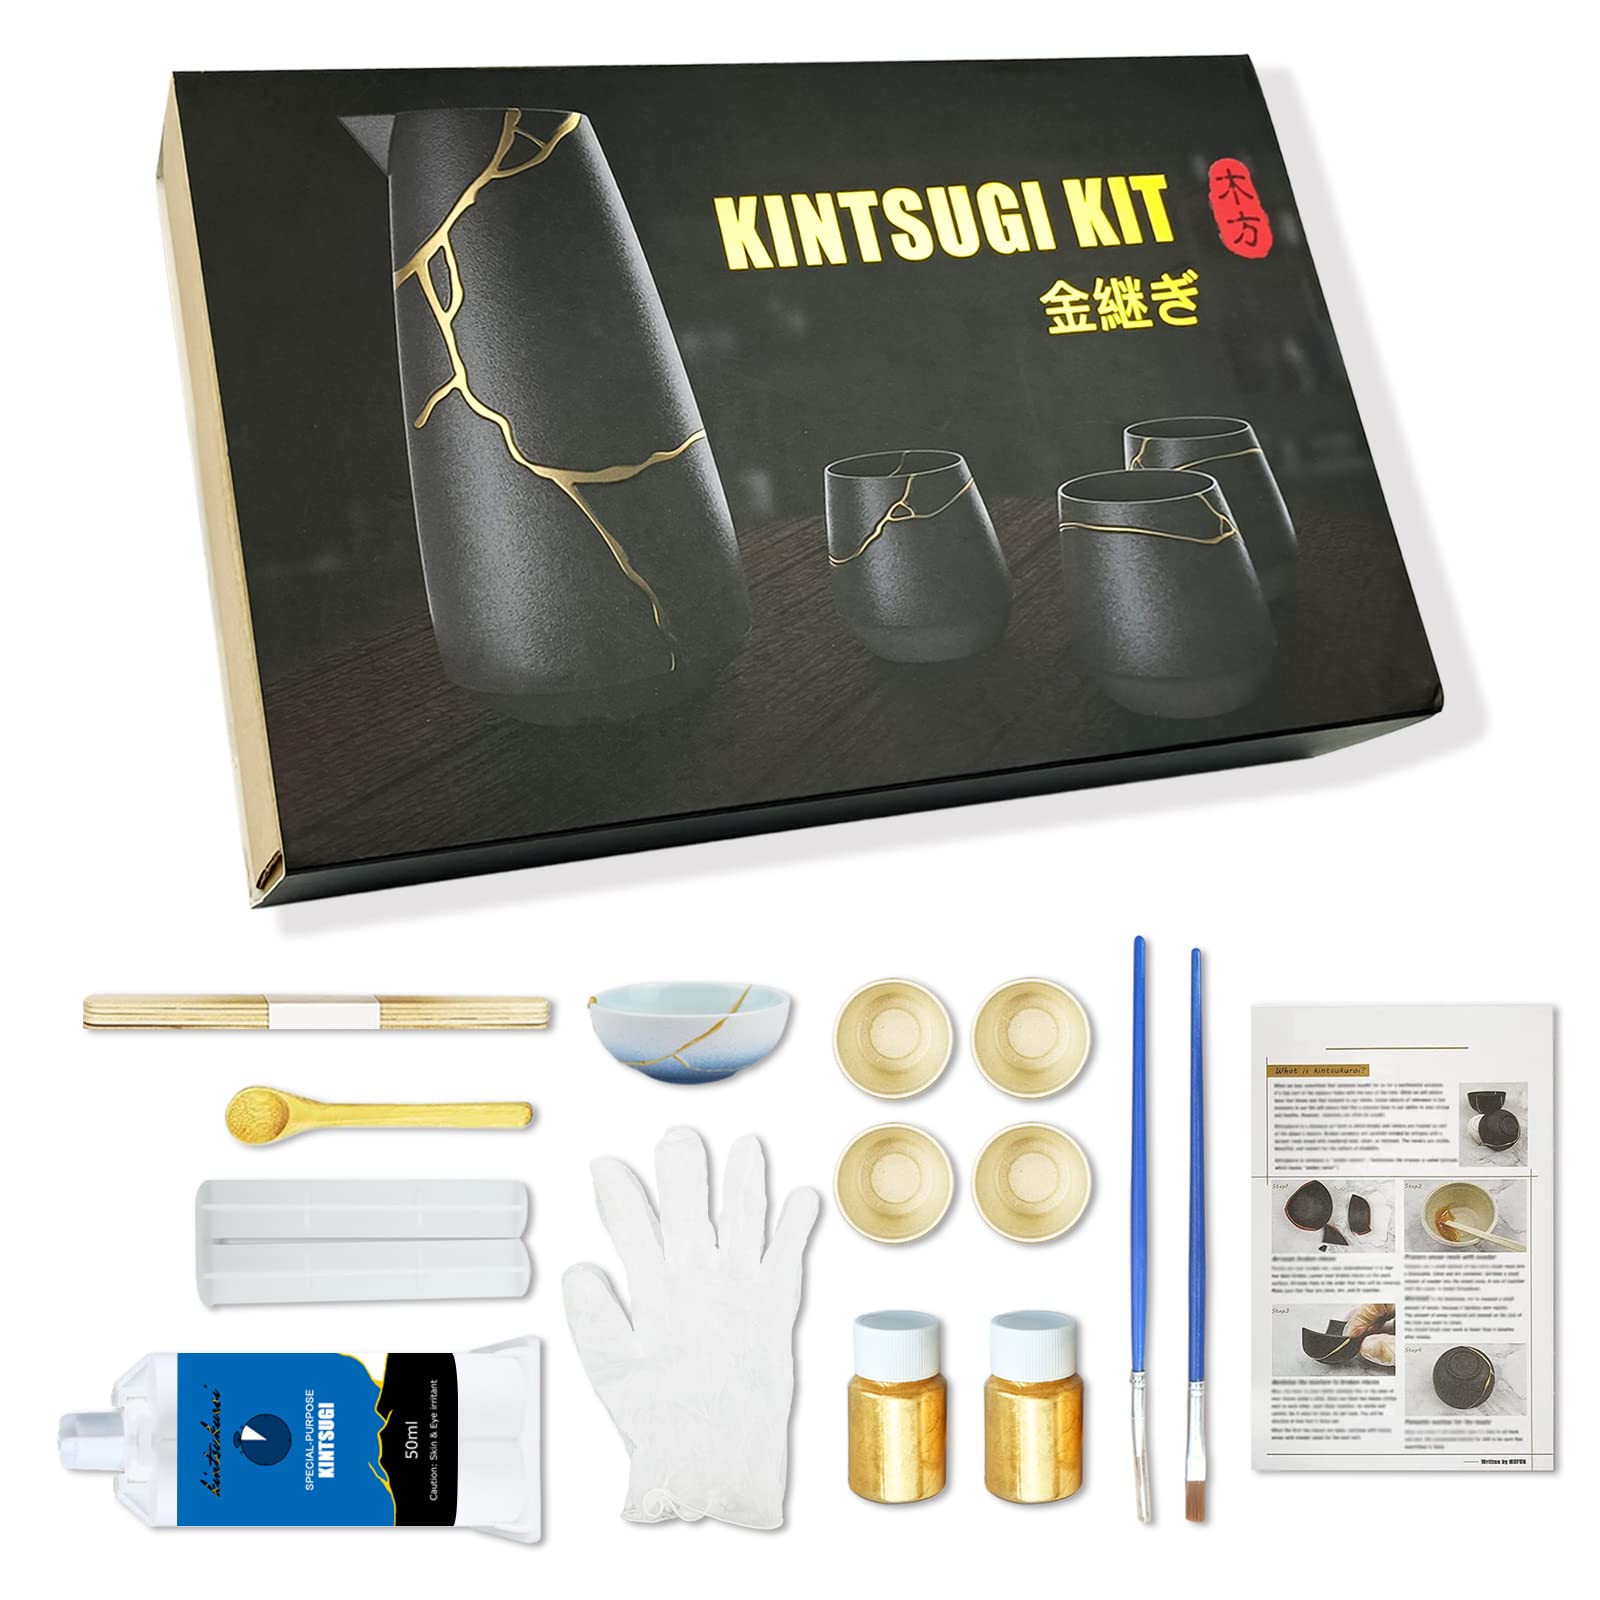 1DFAUL Kintsugi Repair Kit Gold, Japanese Kintsugi Kit to Improve Your Ceramic, Repair Your Meaningful Pottery with Gold Powder Glue, Perfect for